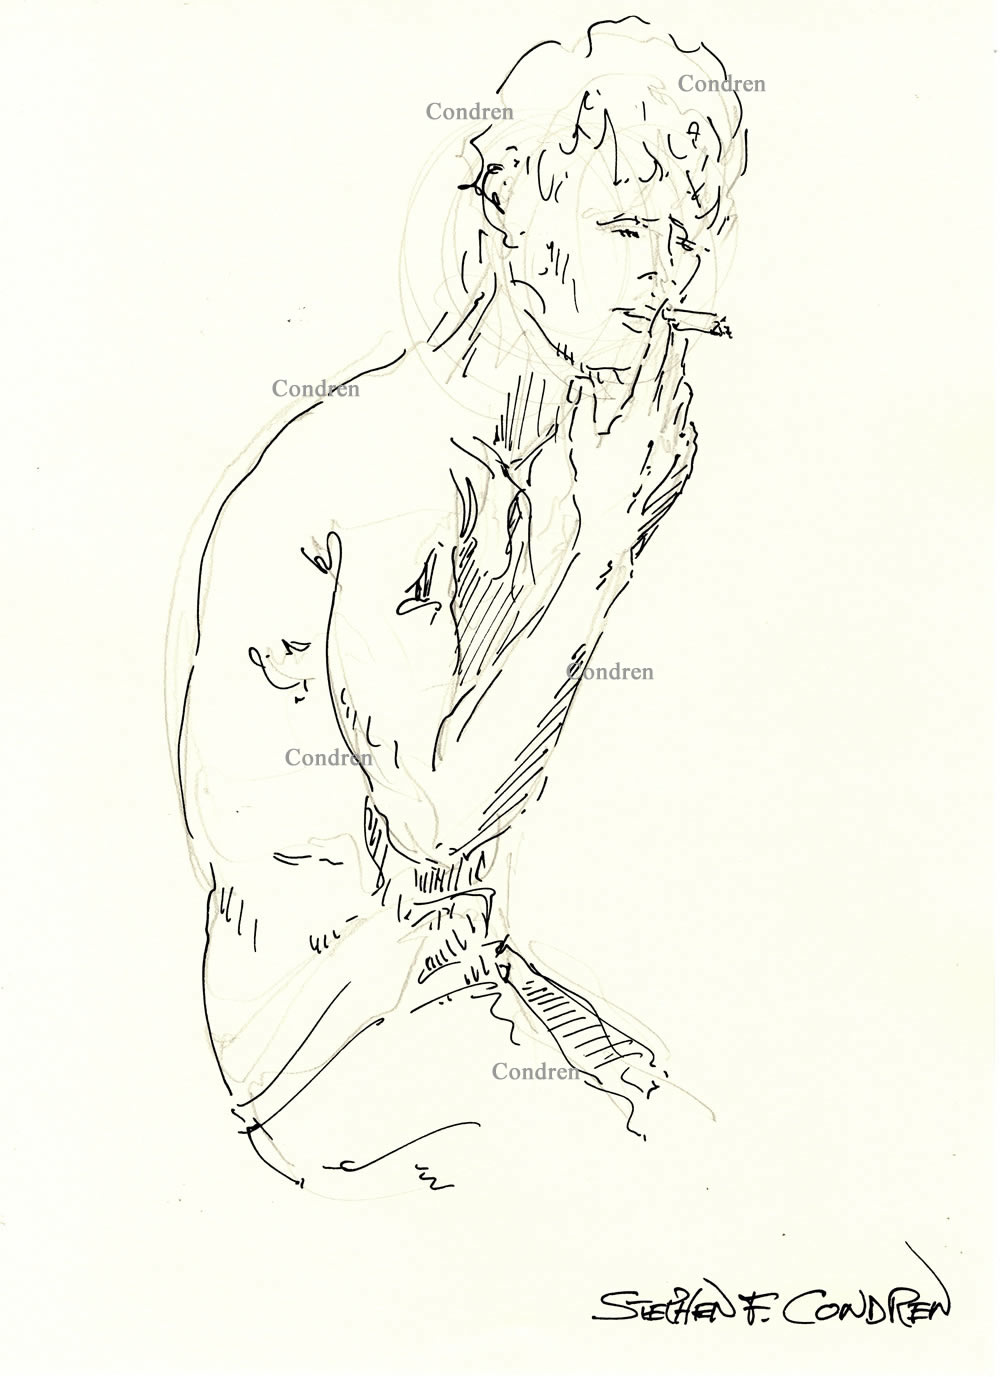 Pen & ink drawing of a shirtless boy smoking with pants down. He has a muscular physique and is cute.